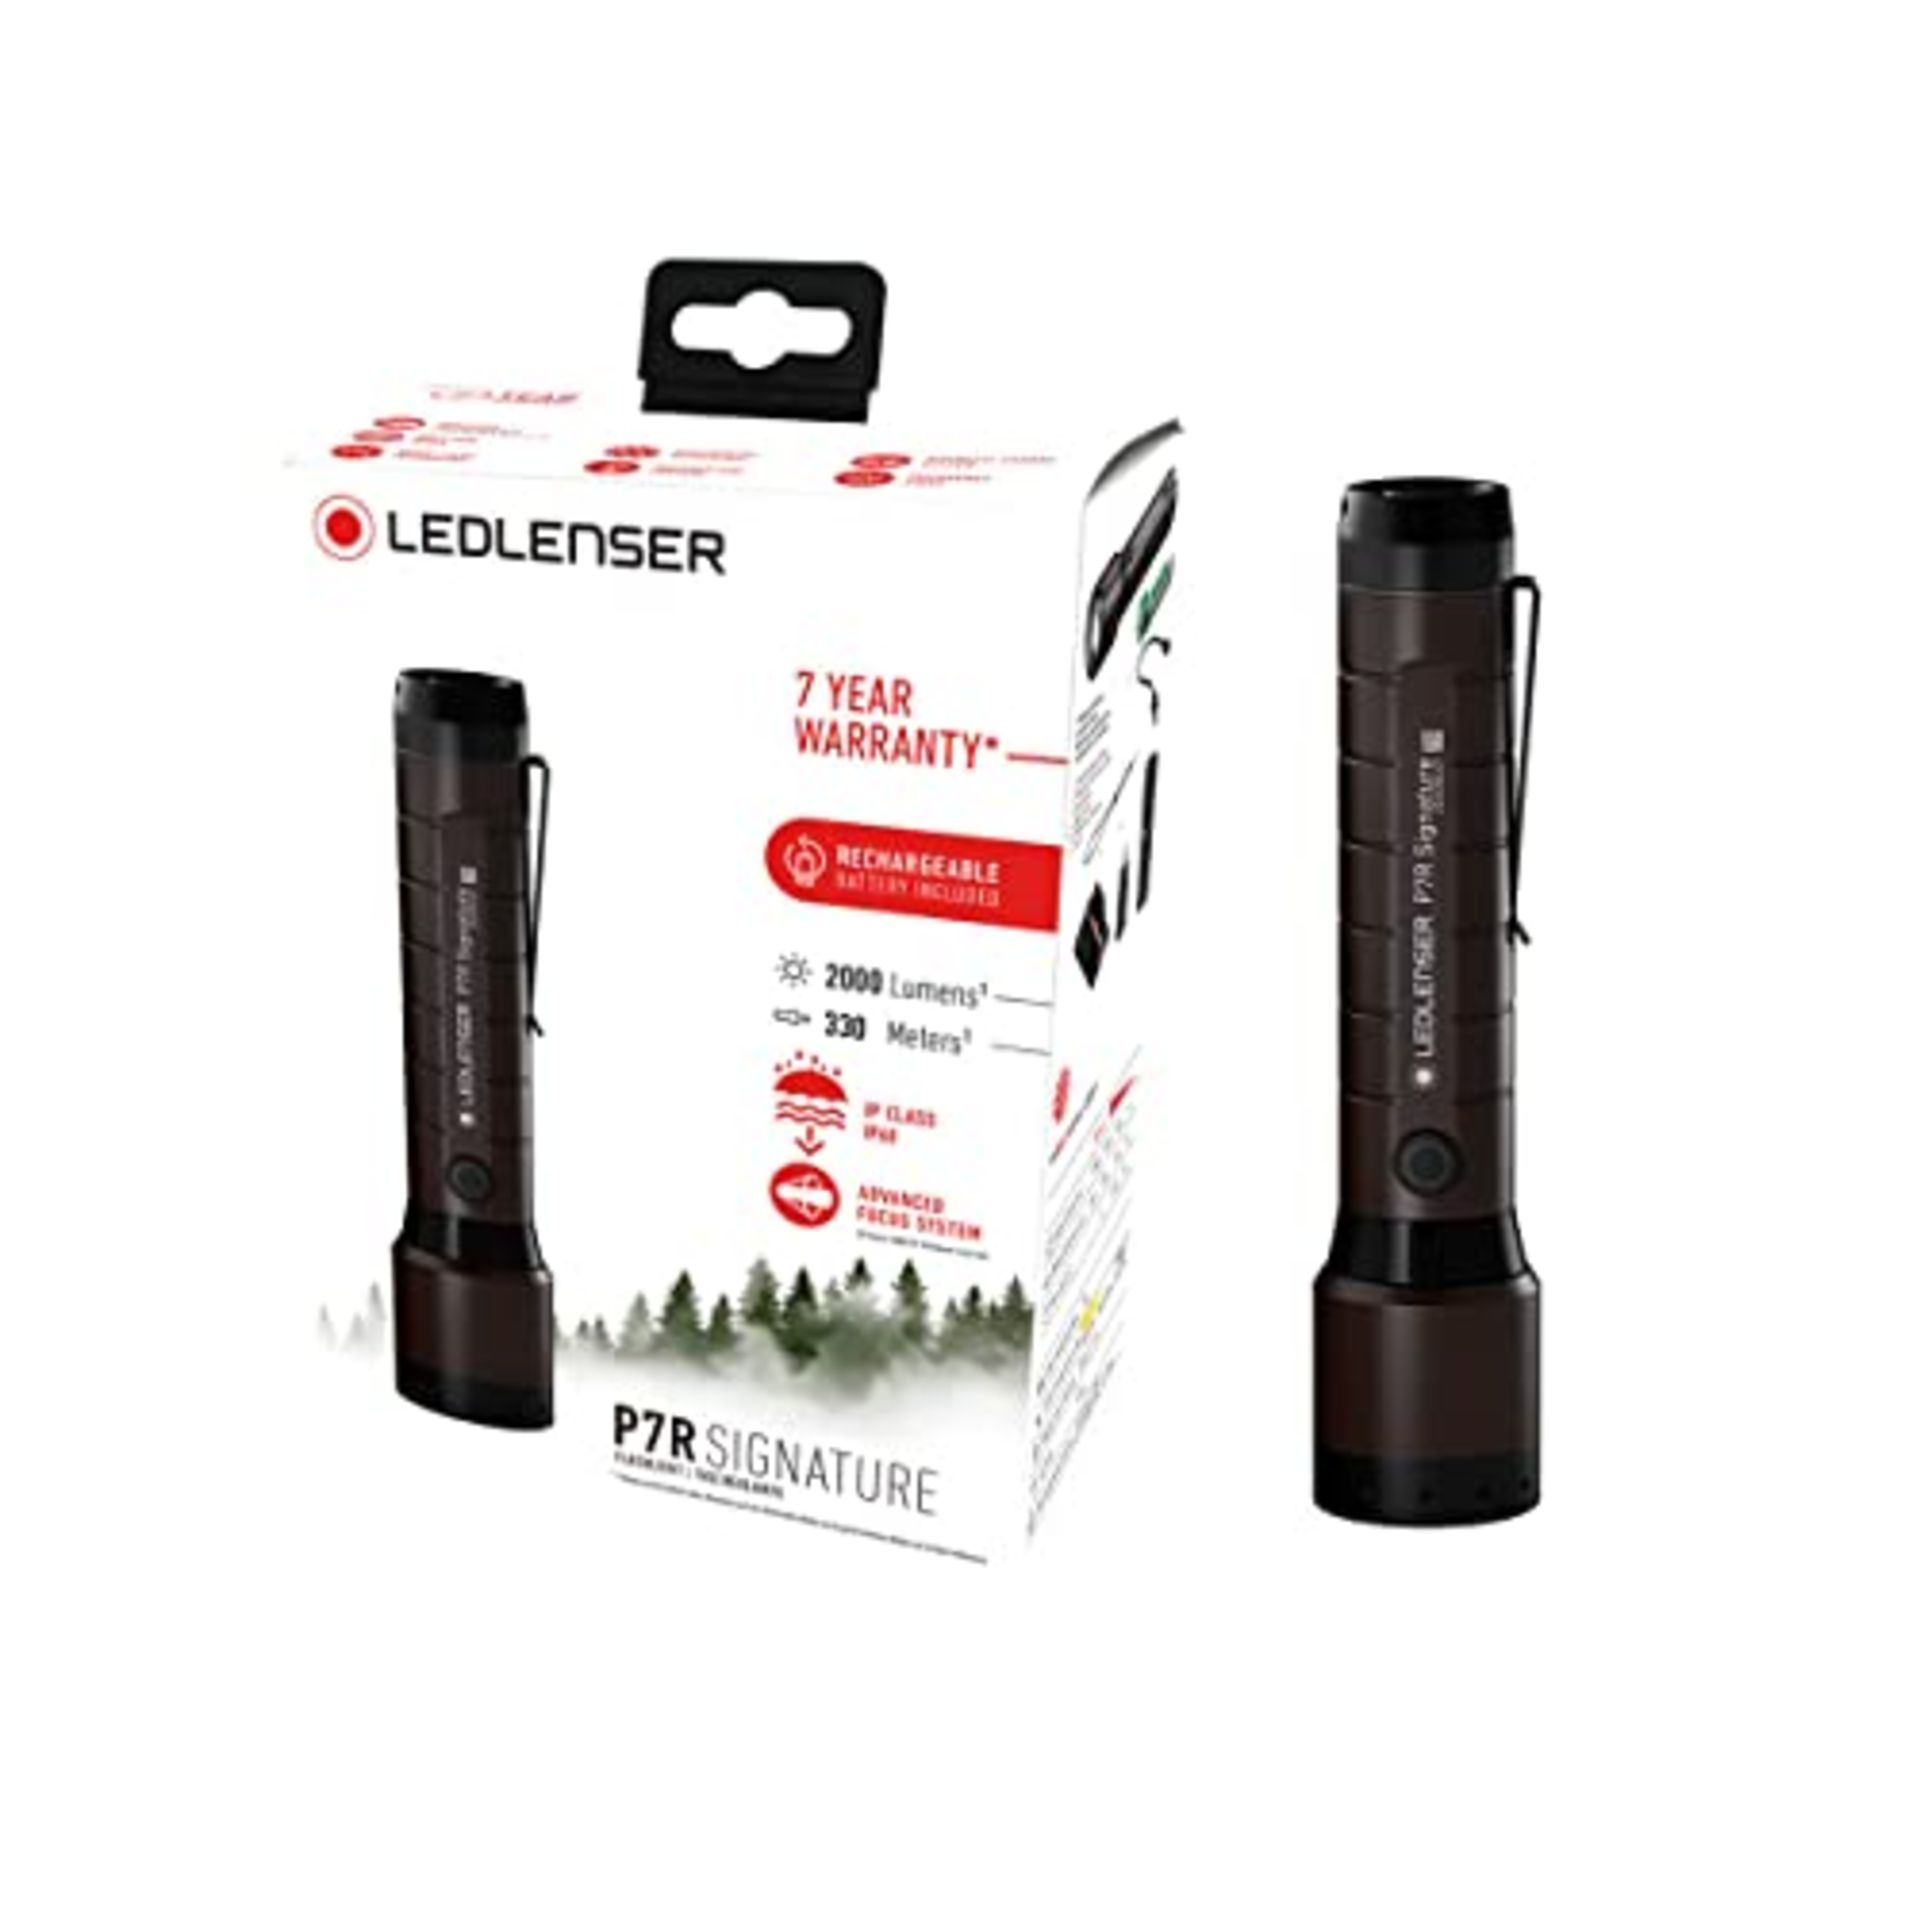 RRP £122.00 Ledlenser P7R Signature - LED Rechargeable Torch, Super Bright 2000 Lumens, Water Resi